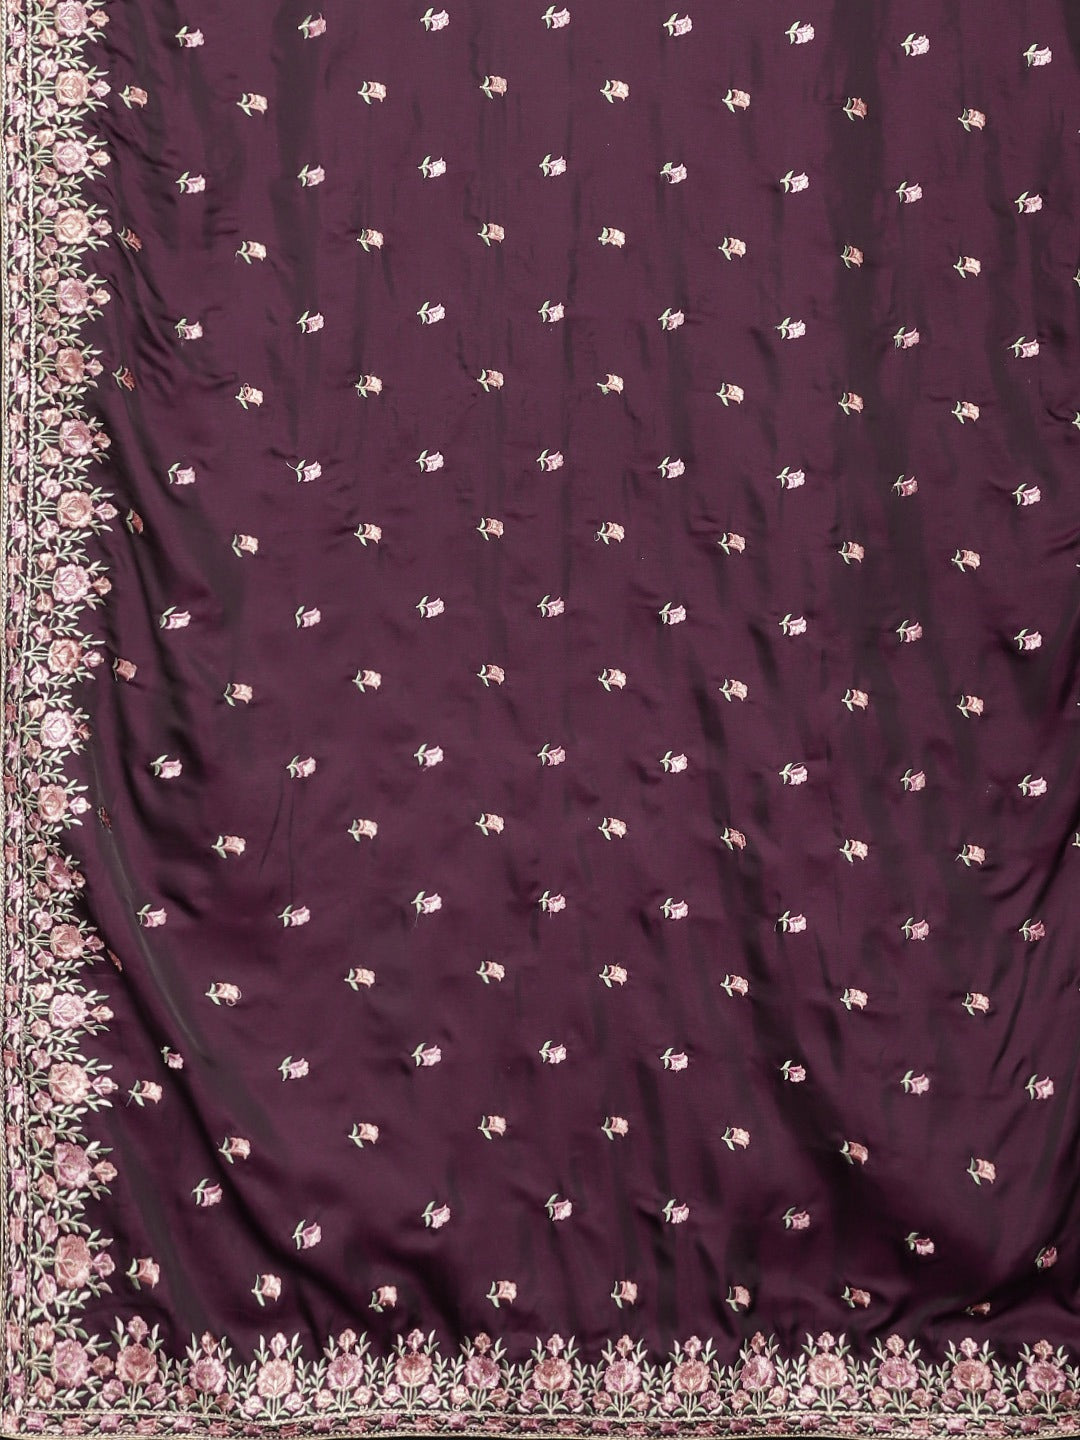 Neeru's Magenta Embroidered Saree With Blouse